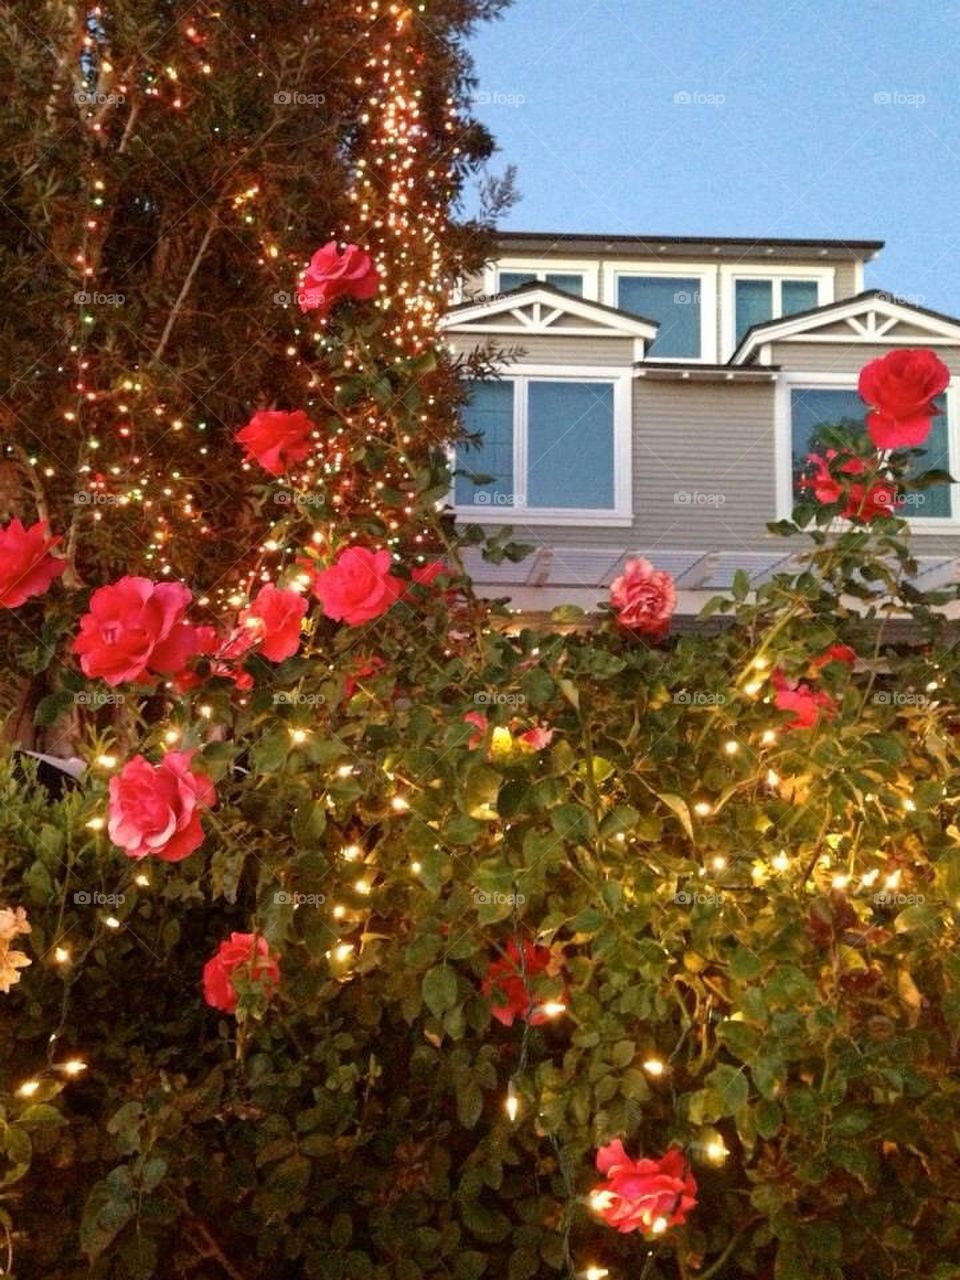 Roses and Lights